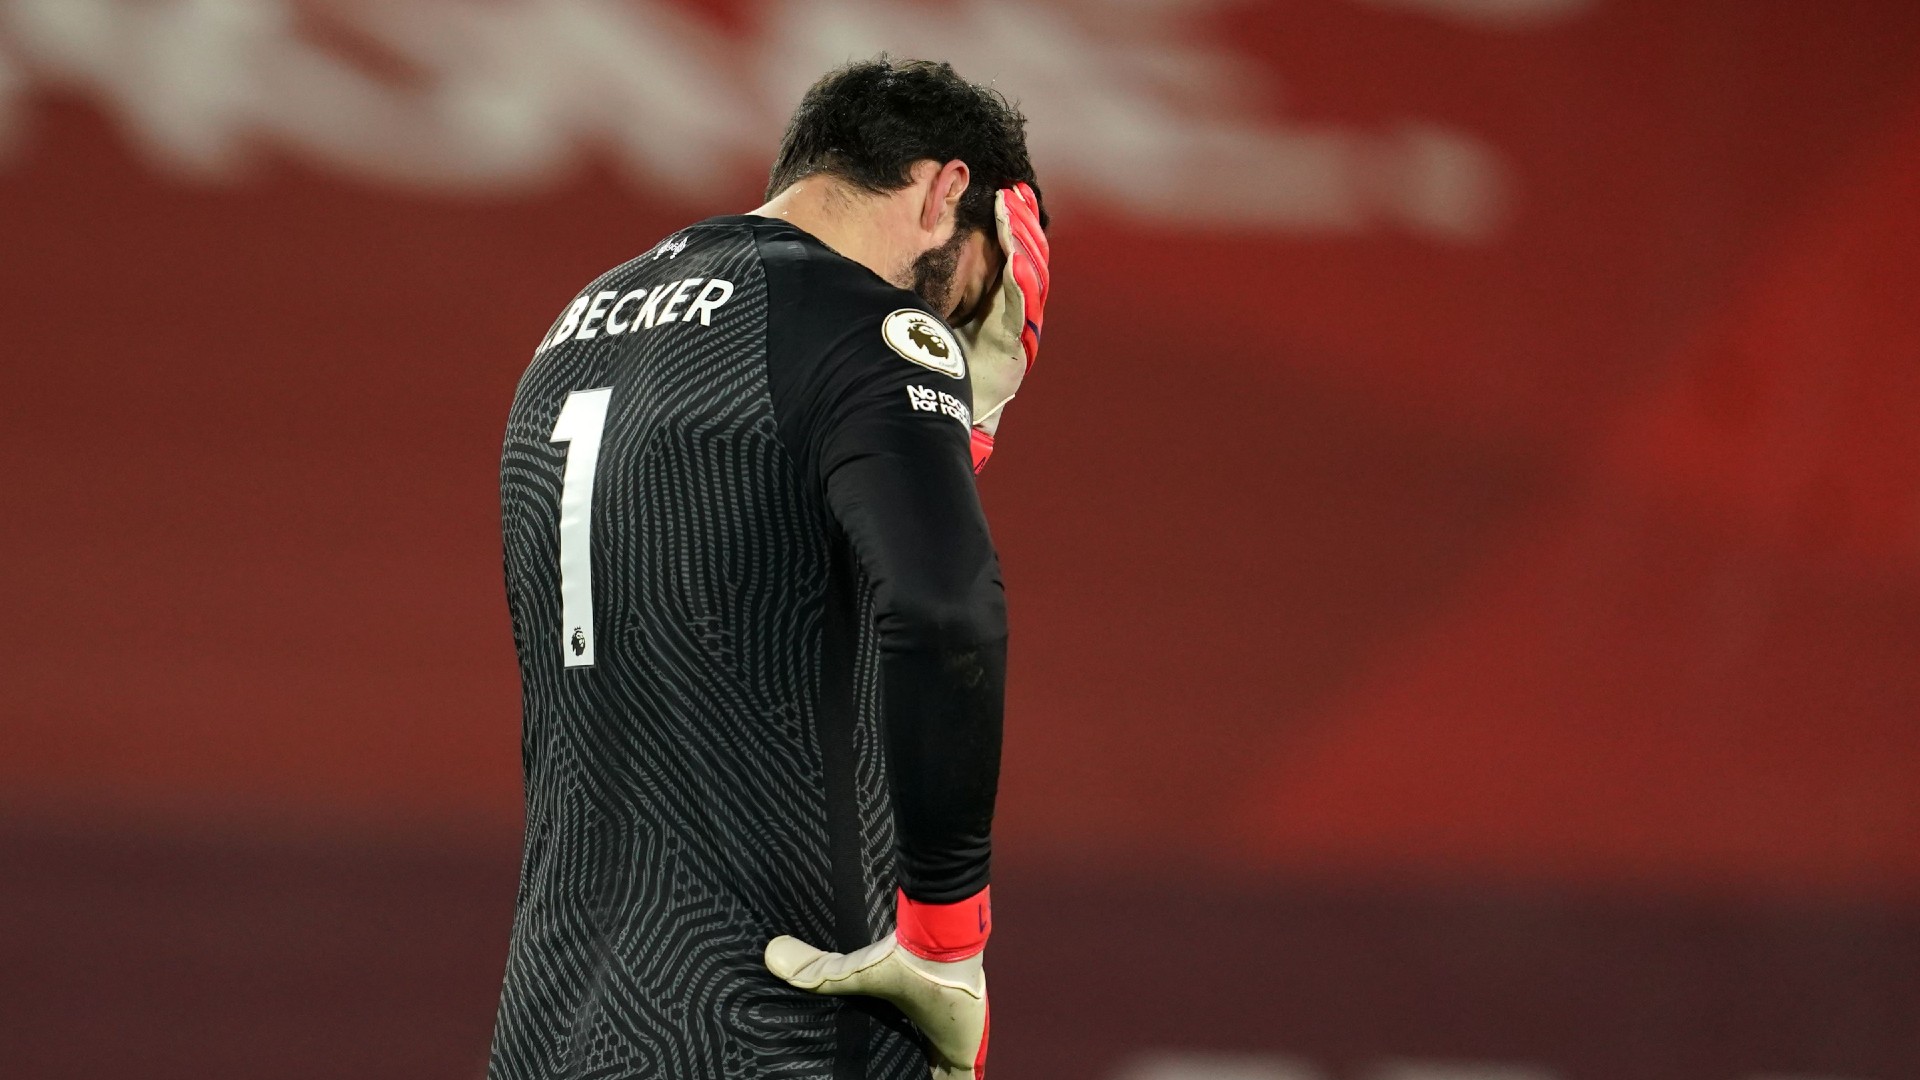 'Alisson had worst game anyone has seen' - Liverpool keeper's 'amateurish' display against Man City slammed by McManaman